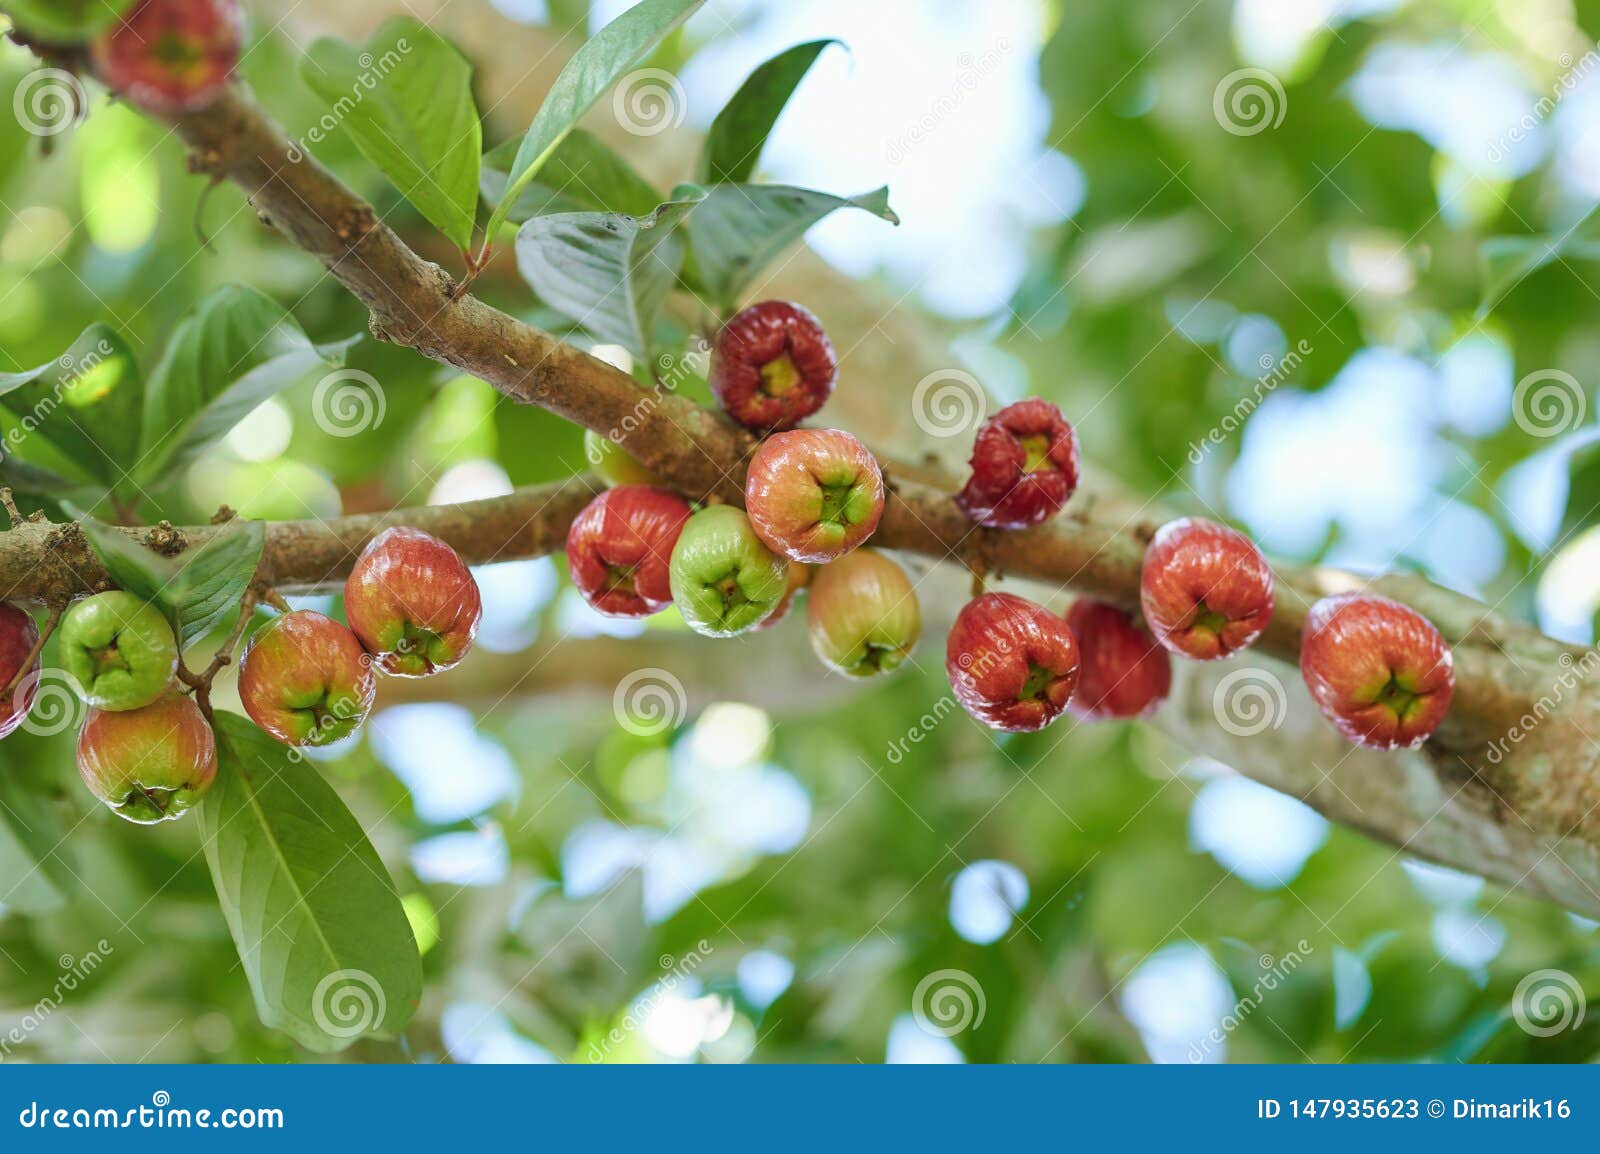 red and green perote fruits